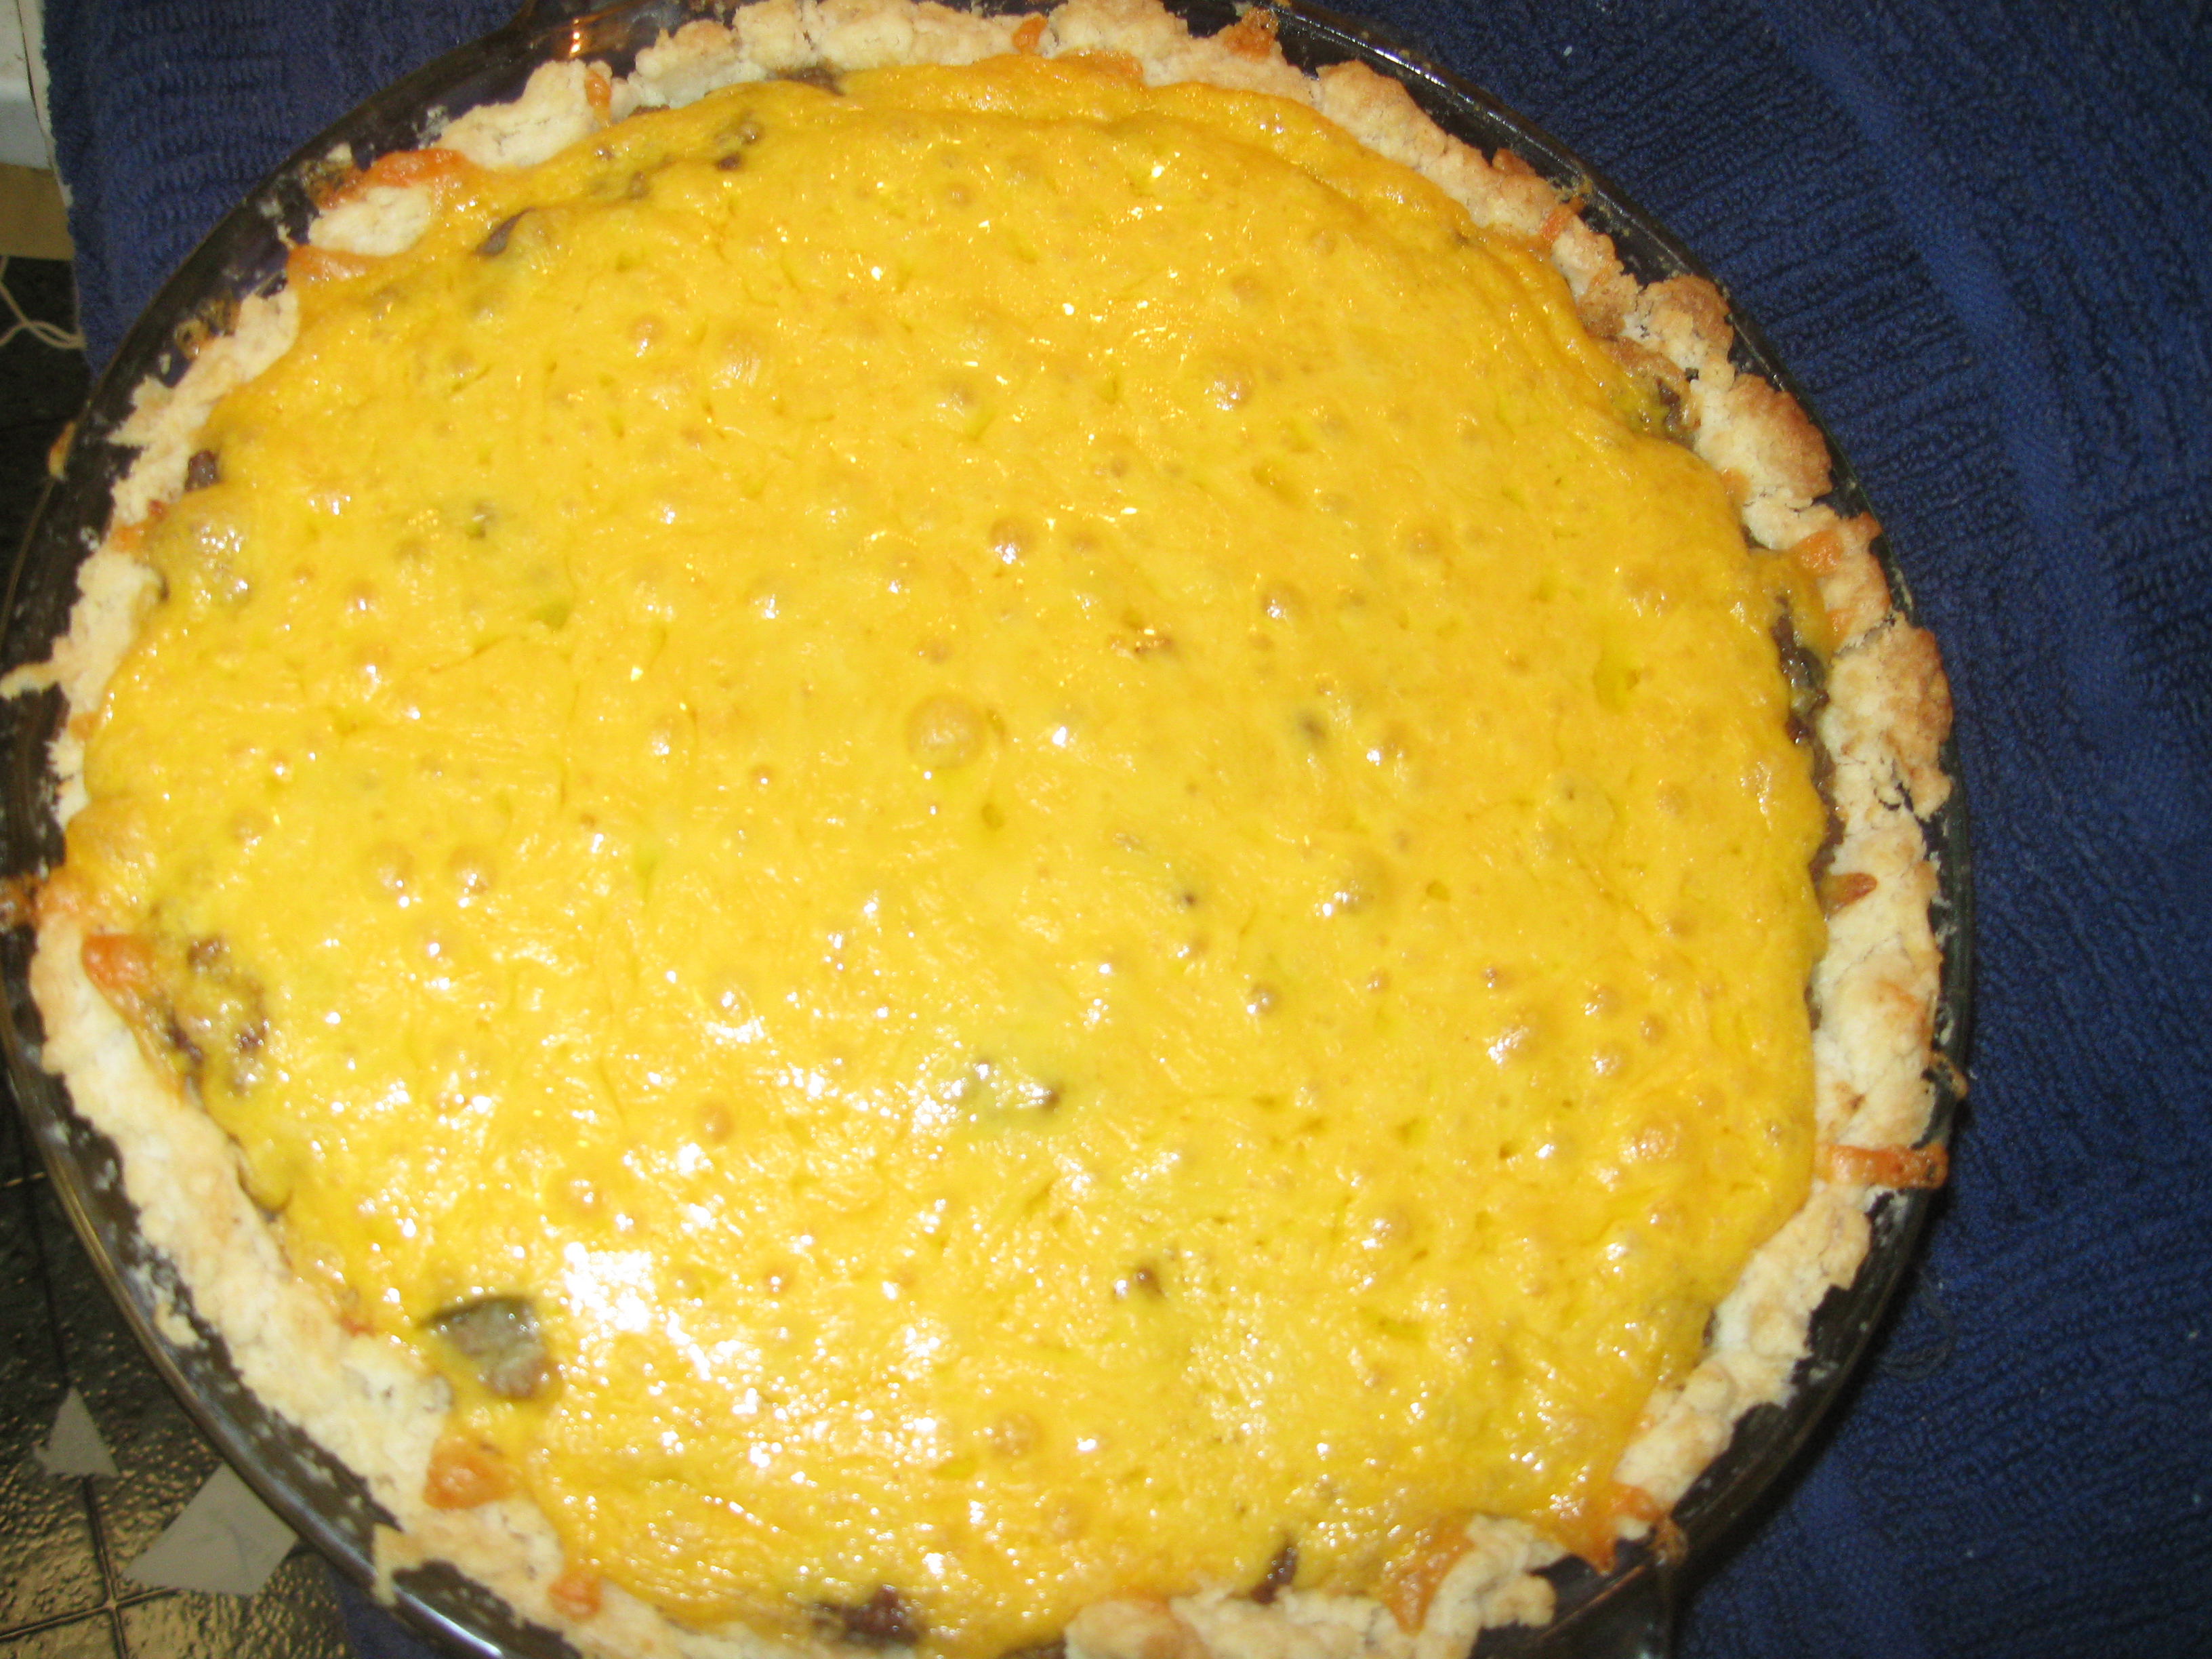 Finished Pickle Pie just out of the oven